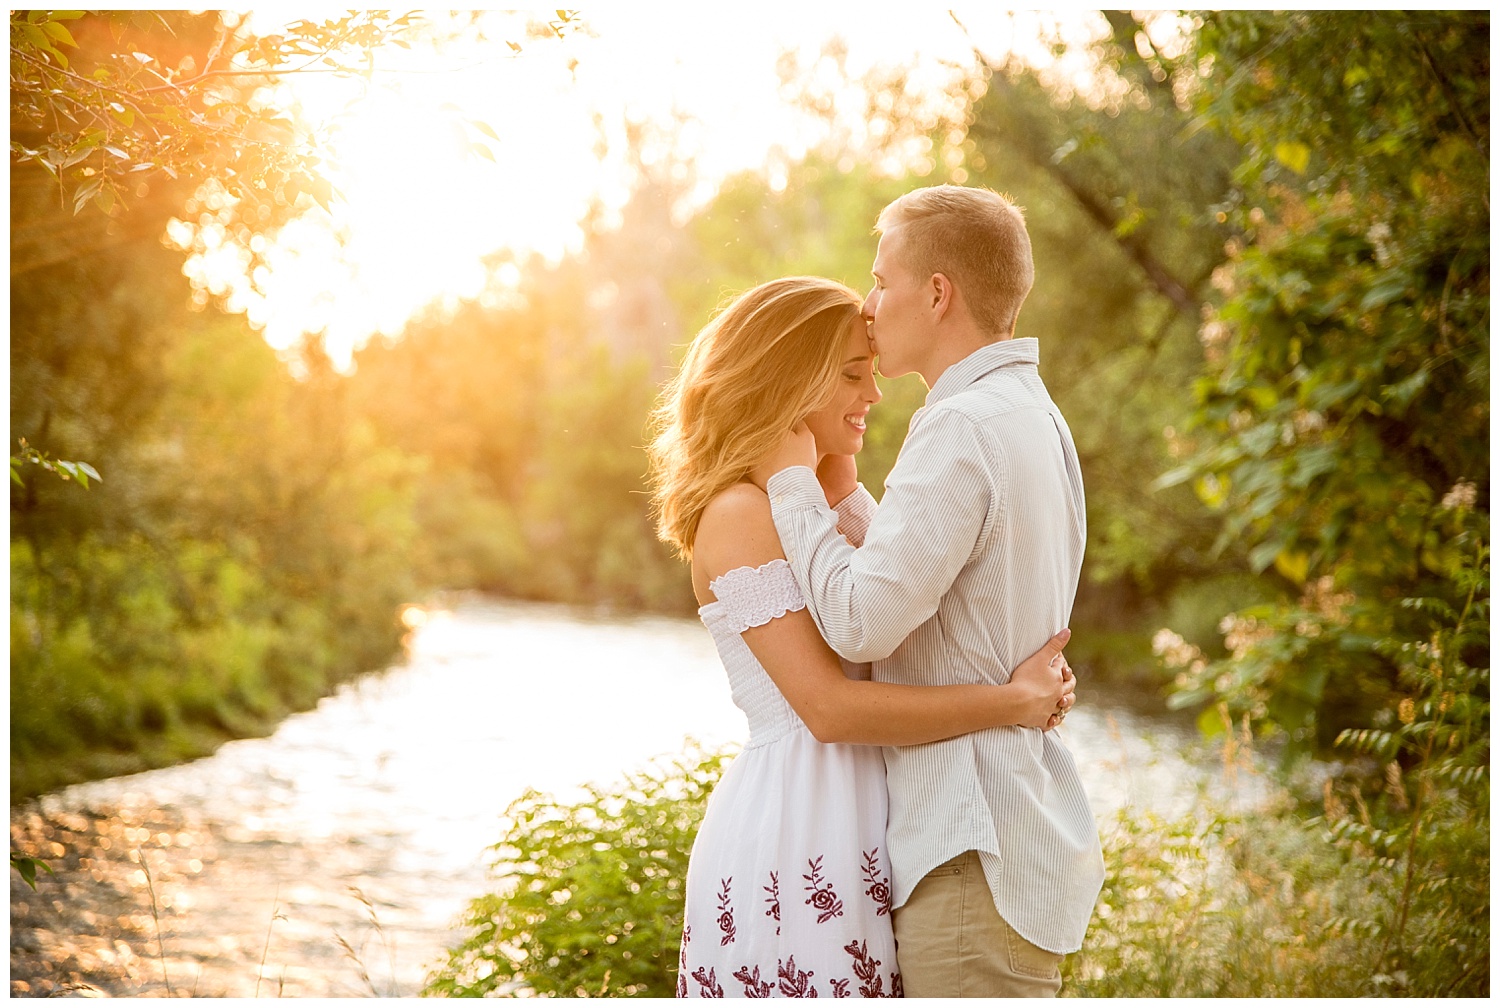 Man Kissing Young Woman on Forehead During Sunset | Mike and Allison's Intimate Engagement Session | Clear Creek, Arvada, Colorado | Farm Wedding Photographer | Apollo Fields Wedding Photojournalism